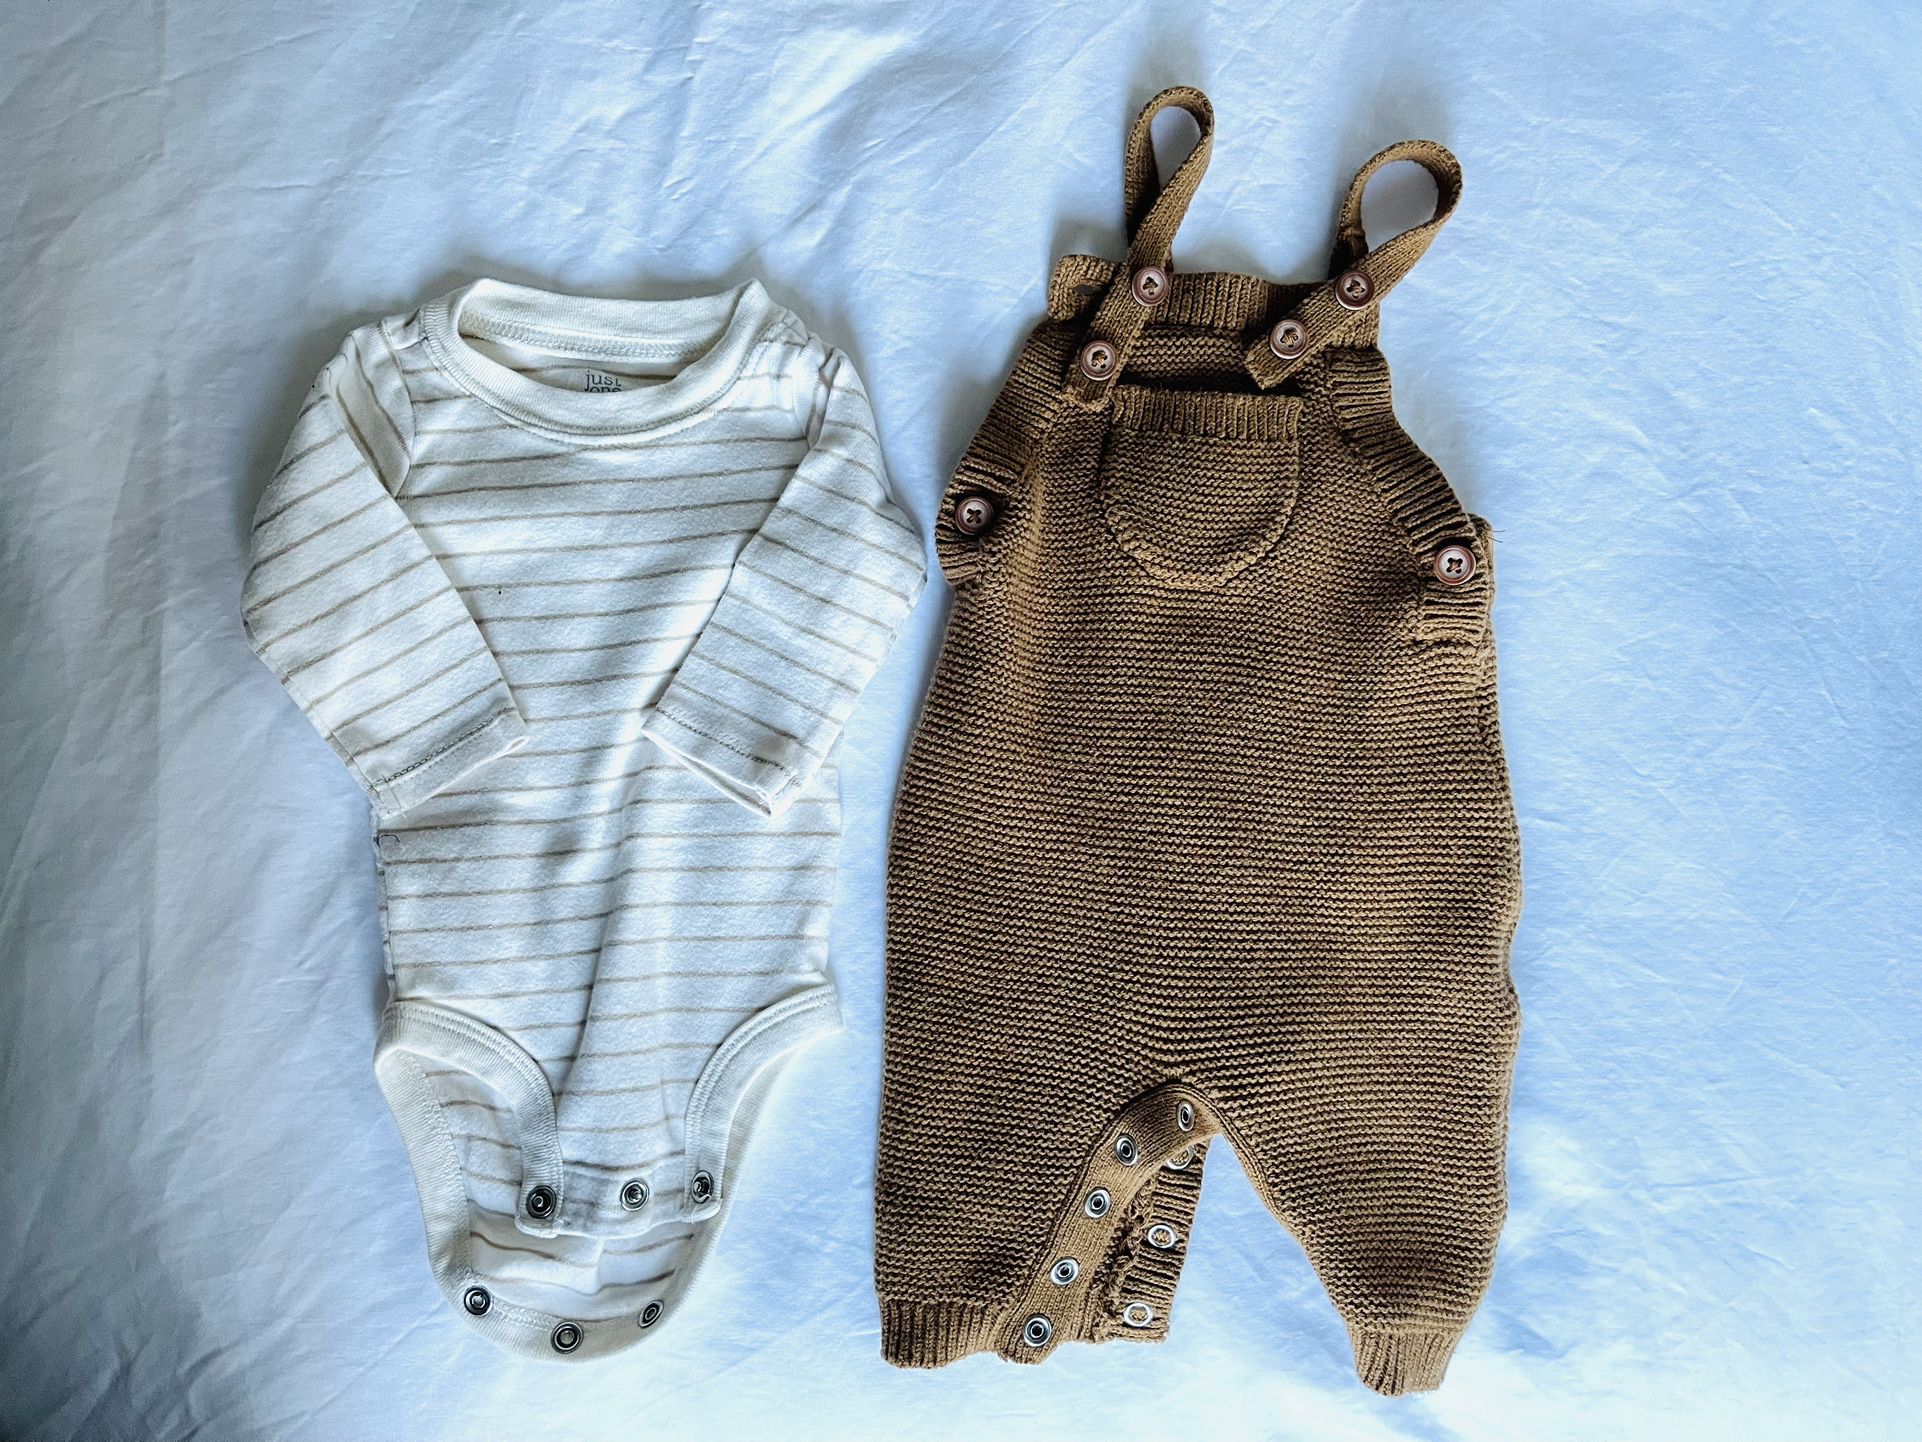 Newborn Baby/ Infant Clothes